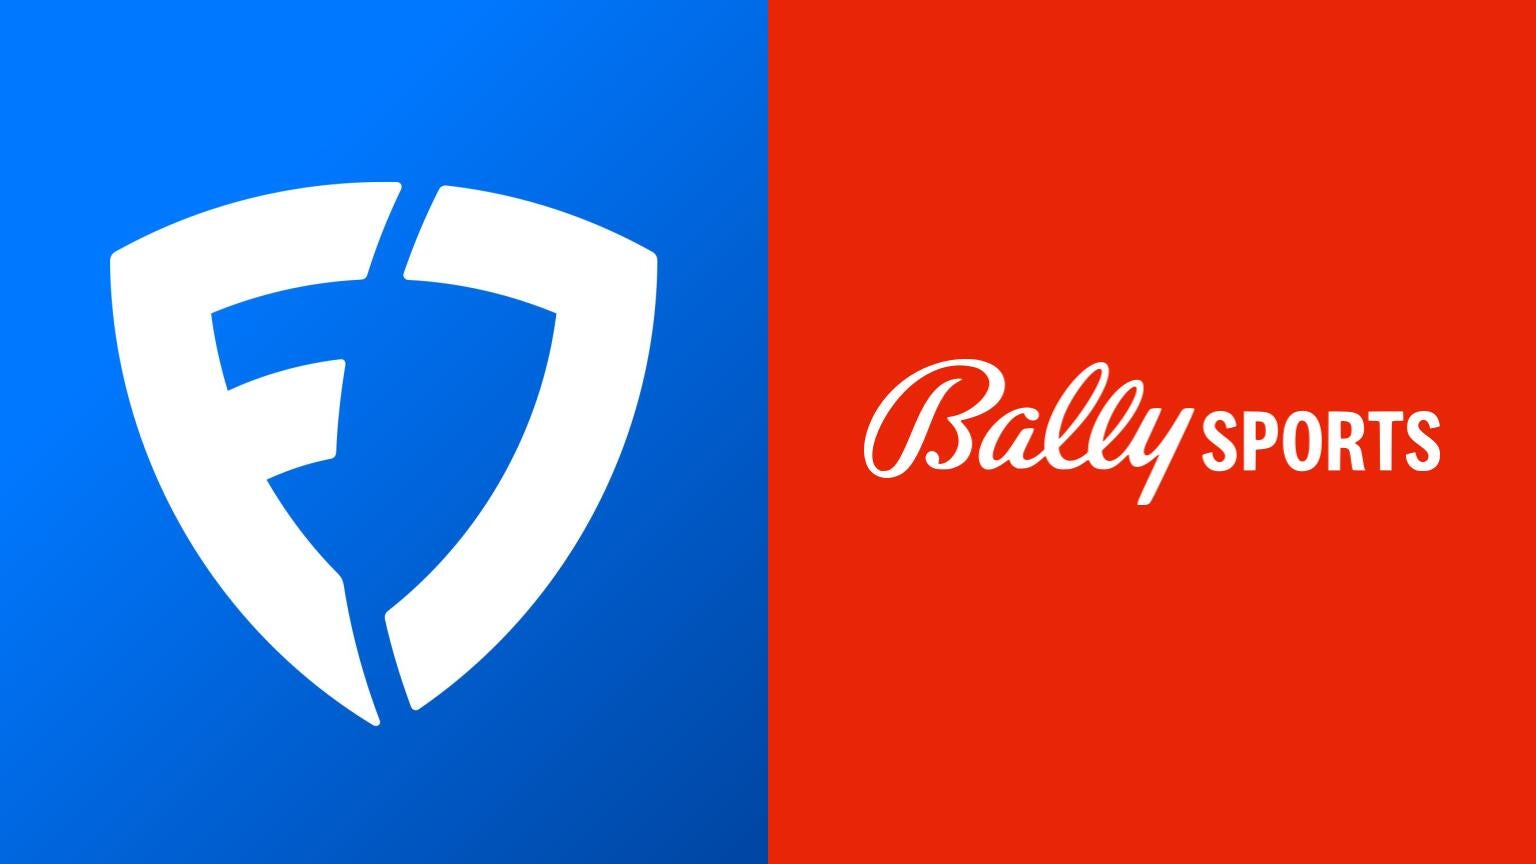 The sports betting firm FanDuel could soon own the naming rights to Bally Sports regional sports networks.